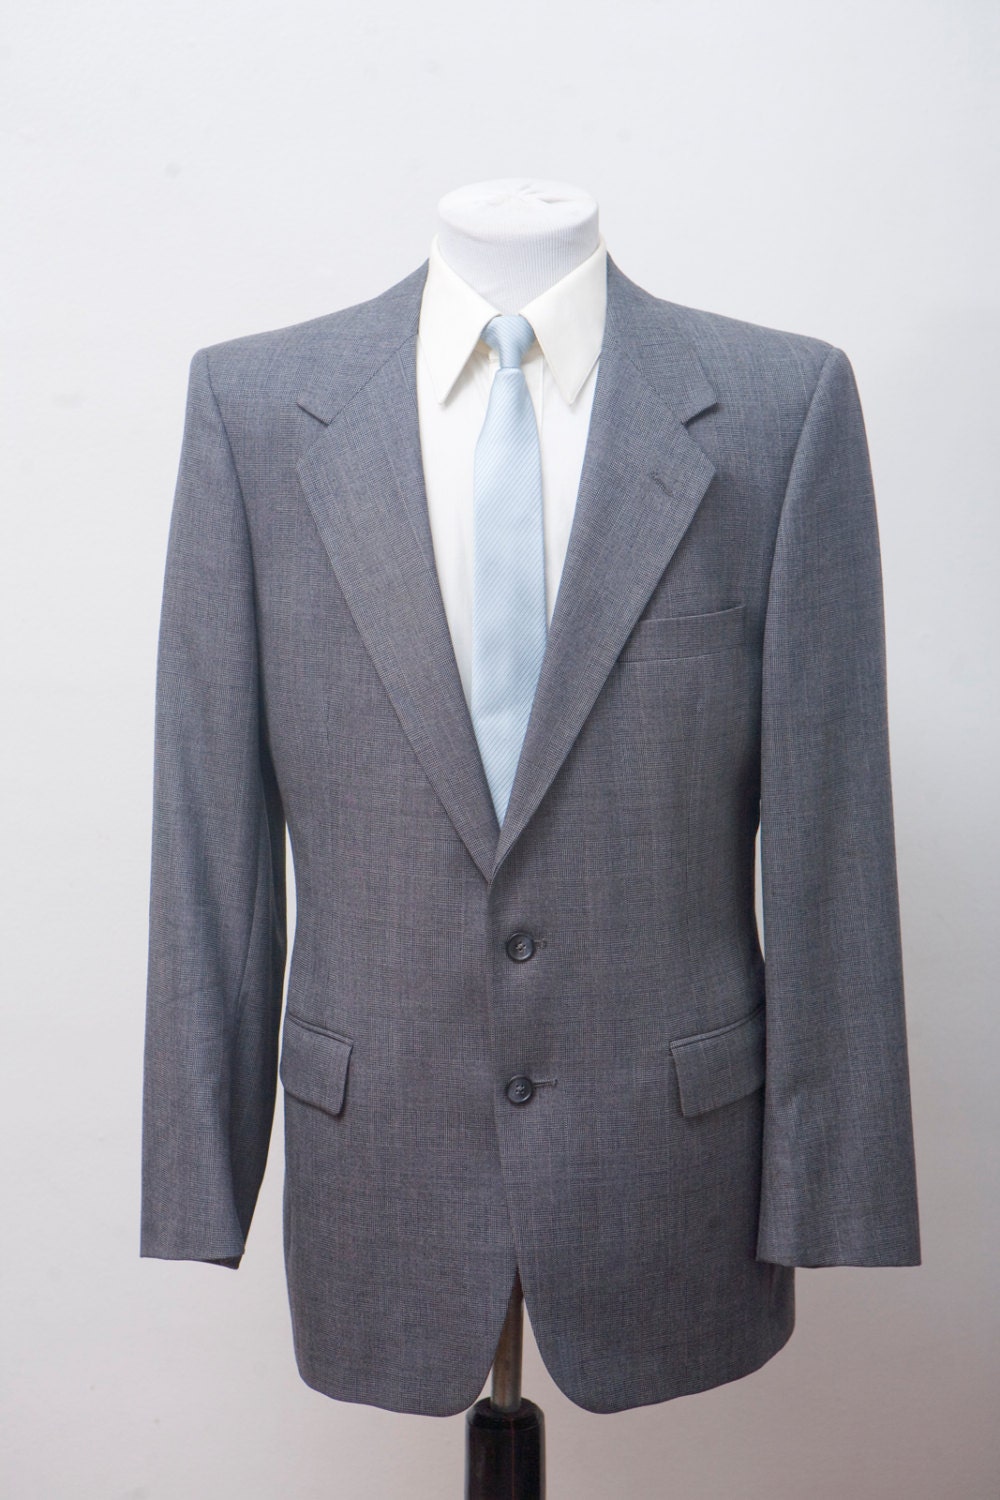 Men's Givenchy Suit / Vintage Grey Blazer and Trousers / - Etsy